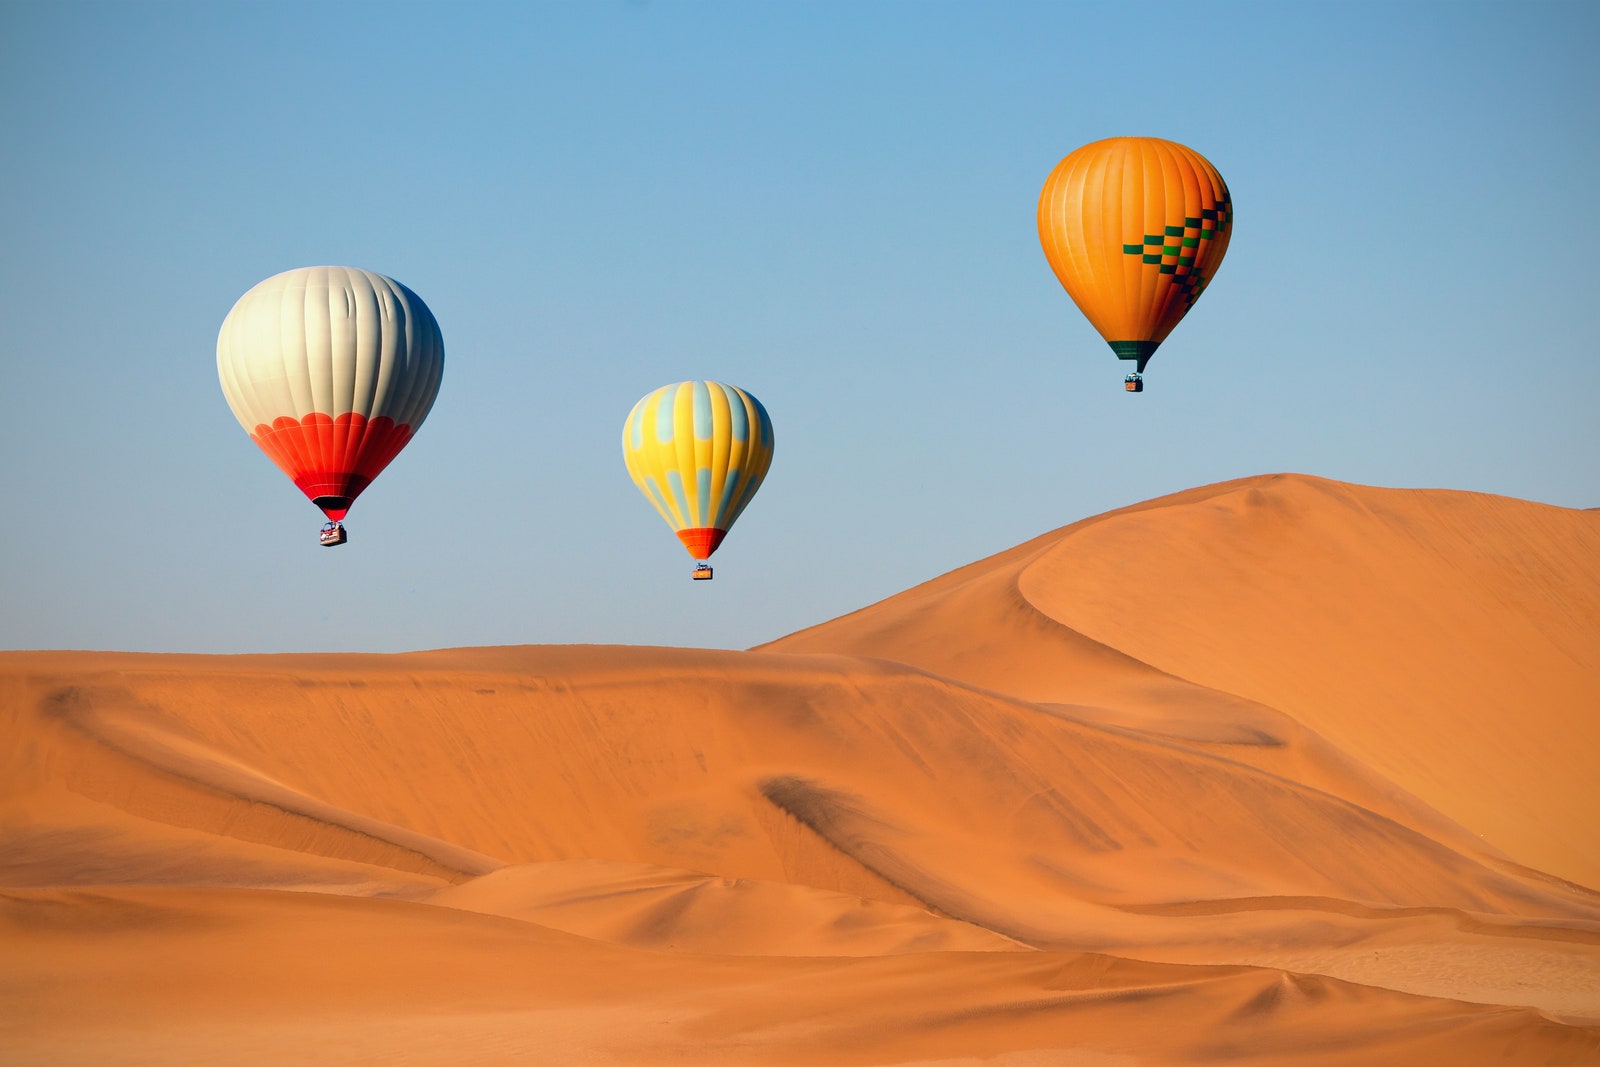 Colored hot air balloons flying over the sand dunes at sunset